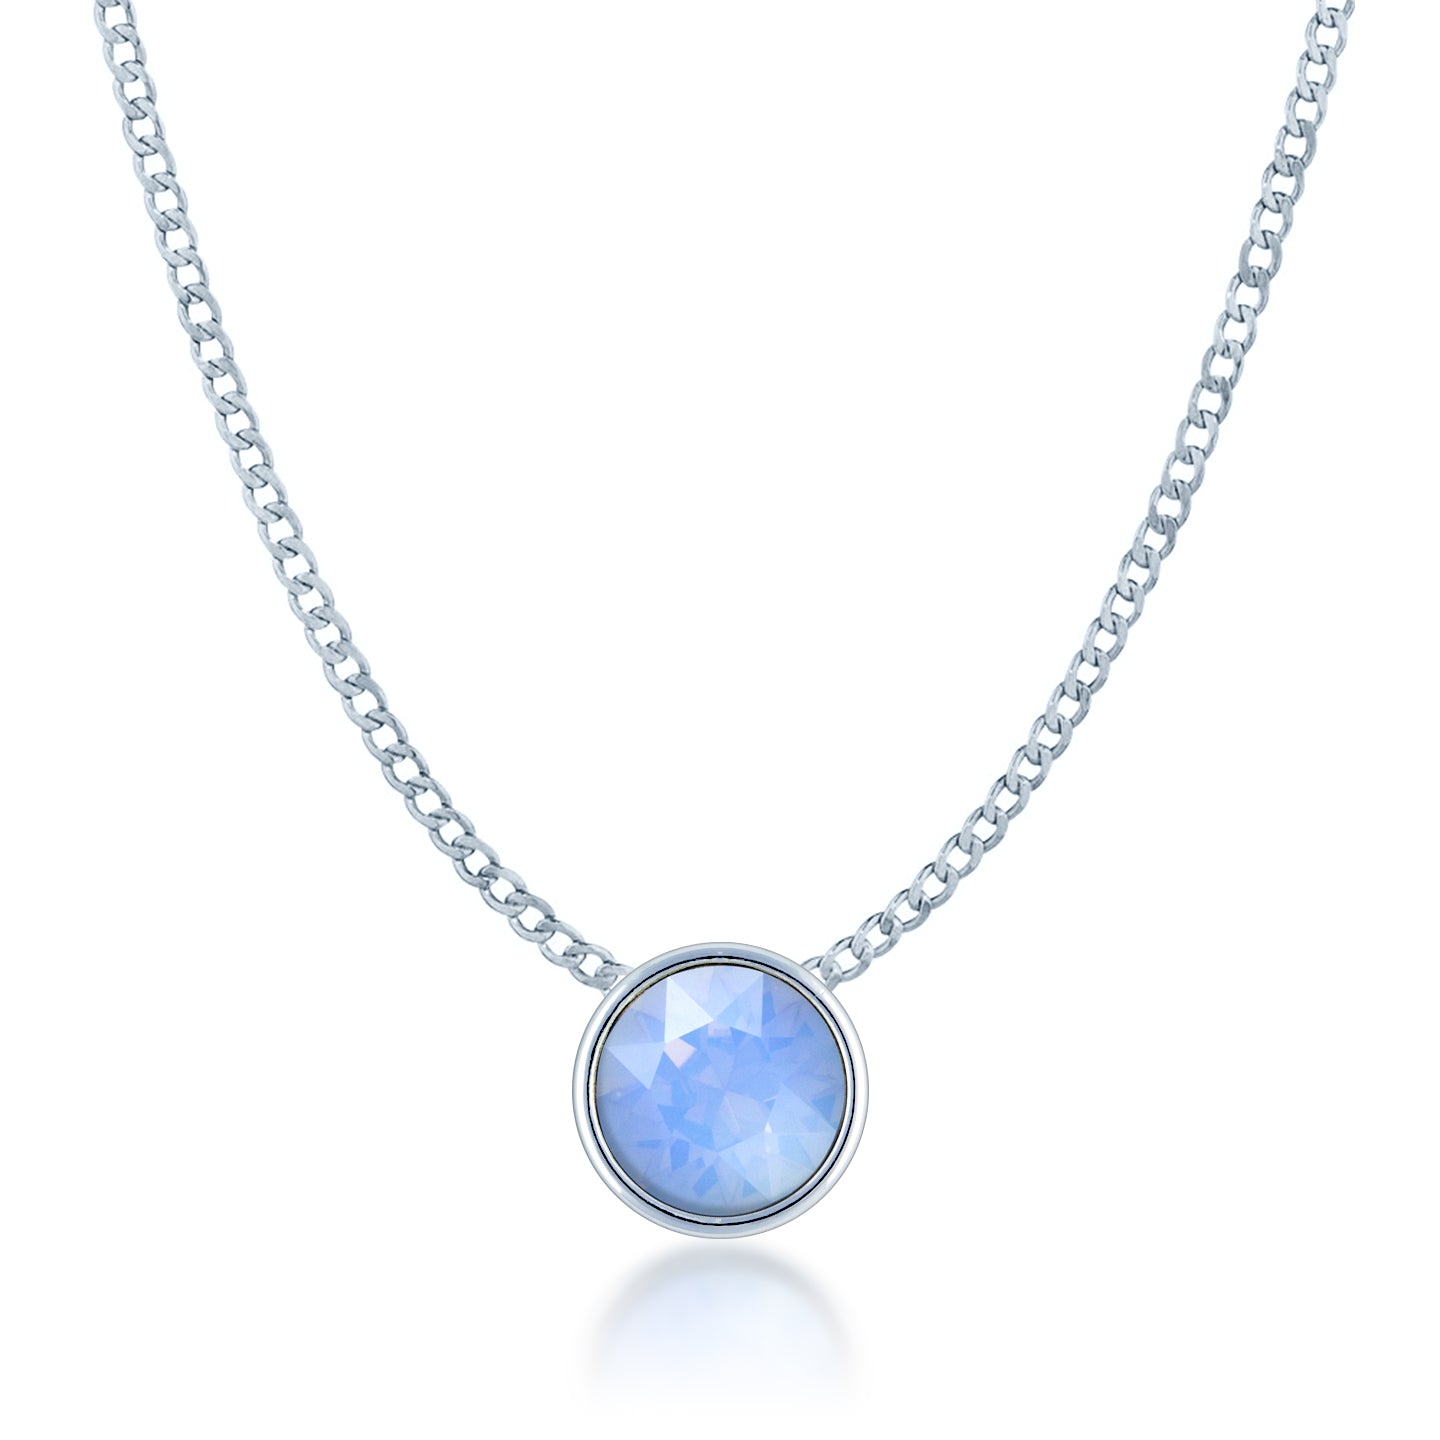 Harley Small Pendant Necklace with Air Blue Round Opals from Swarovski Silver Toned Rhodium Plated - Ed Heart